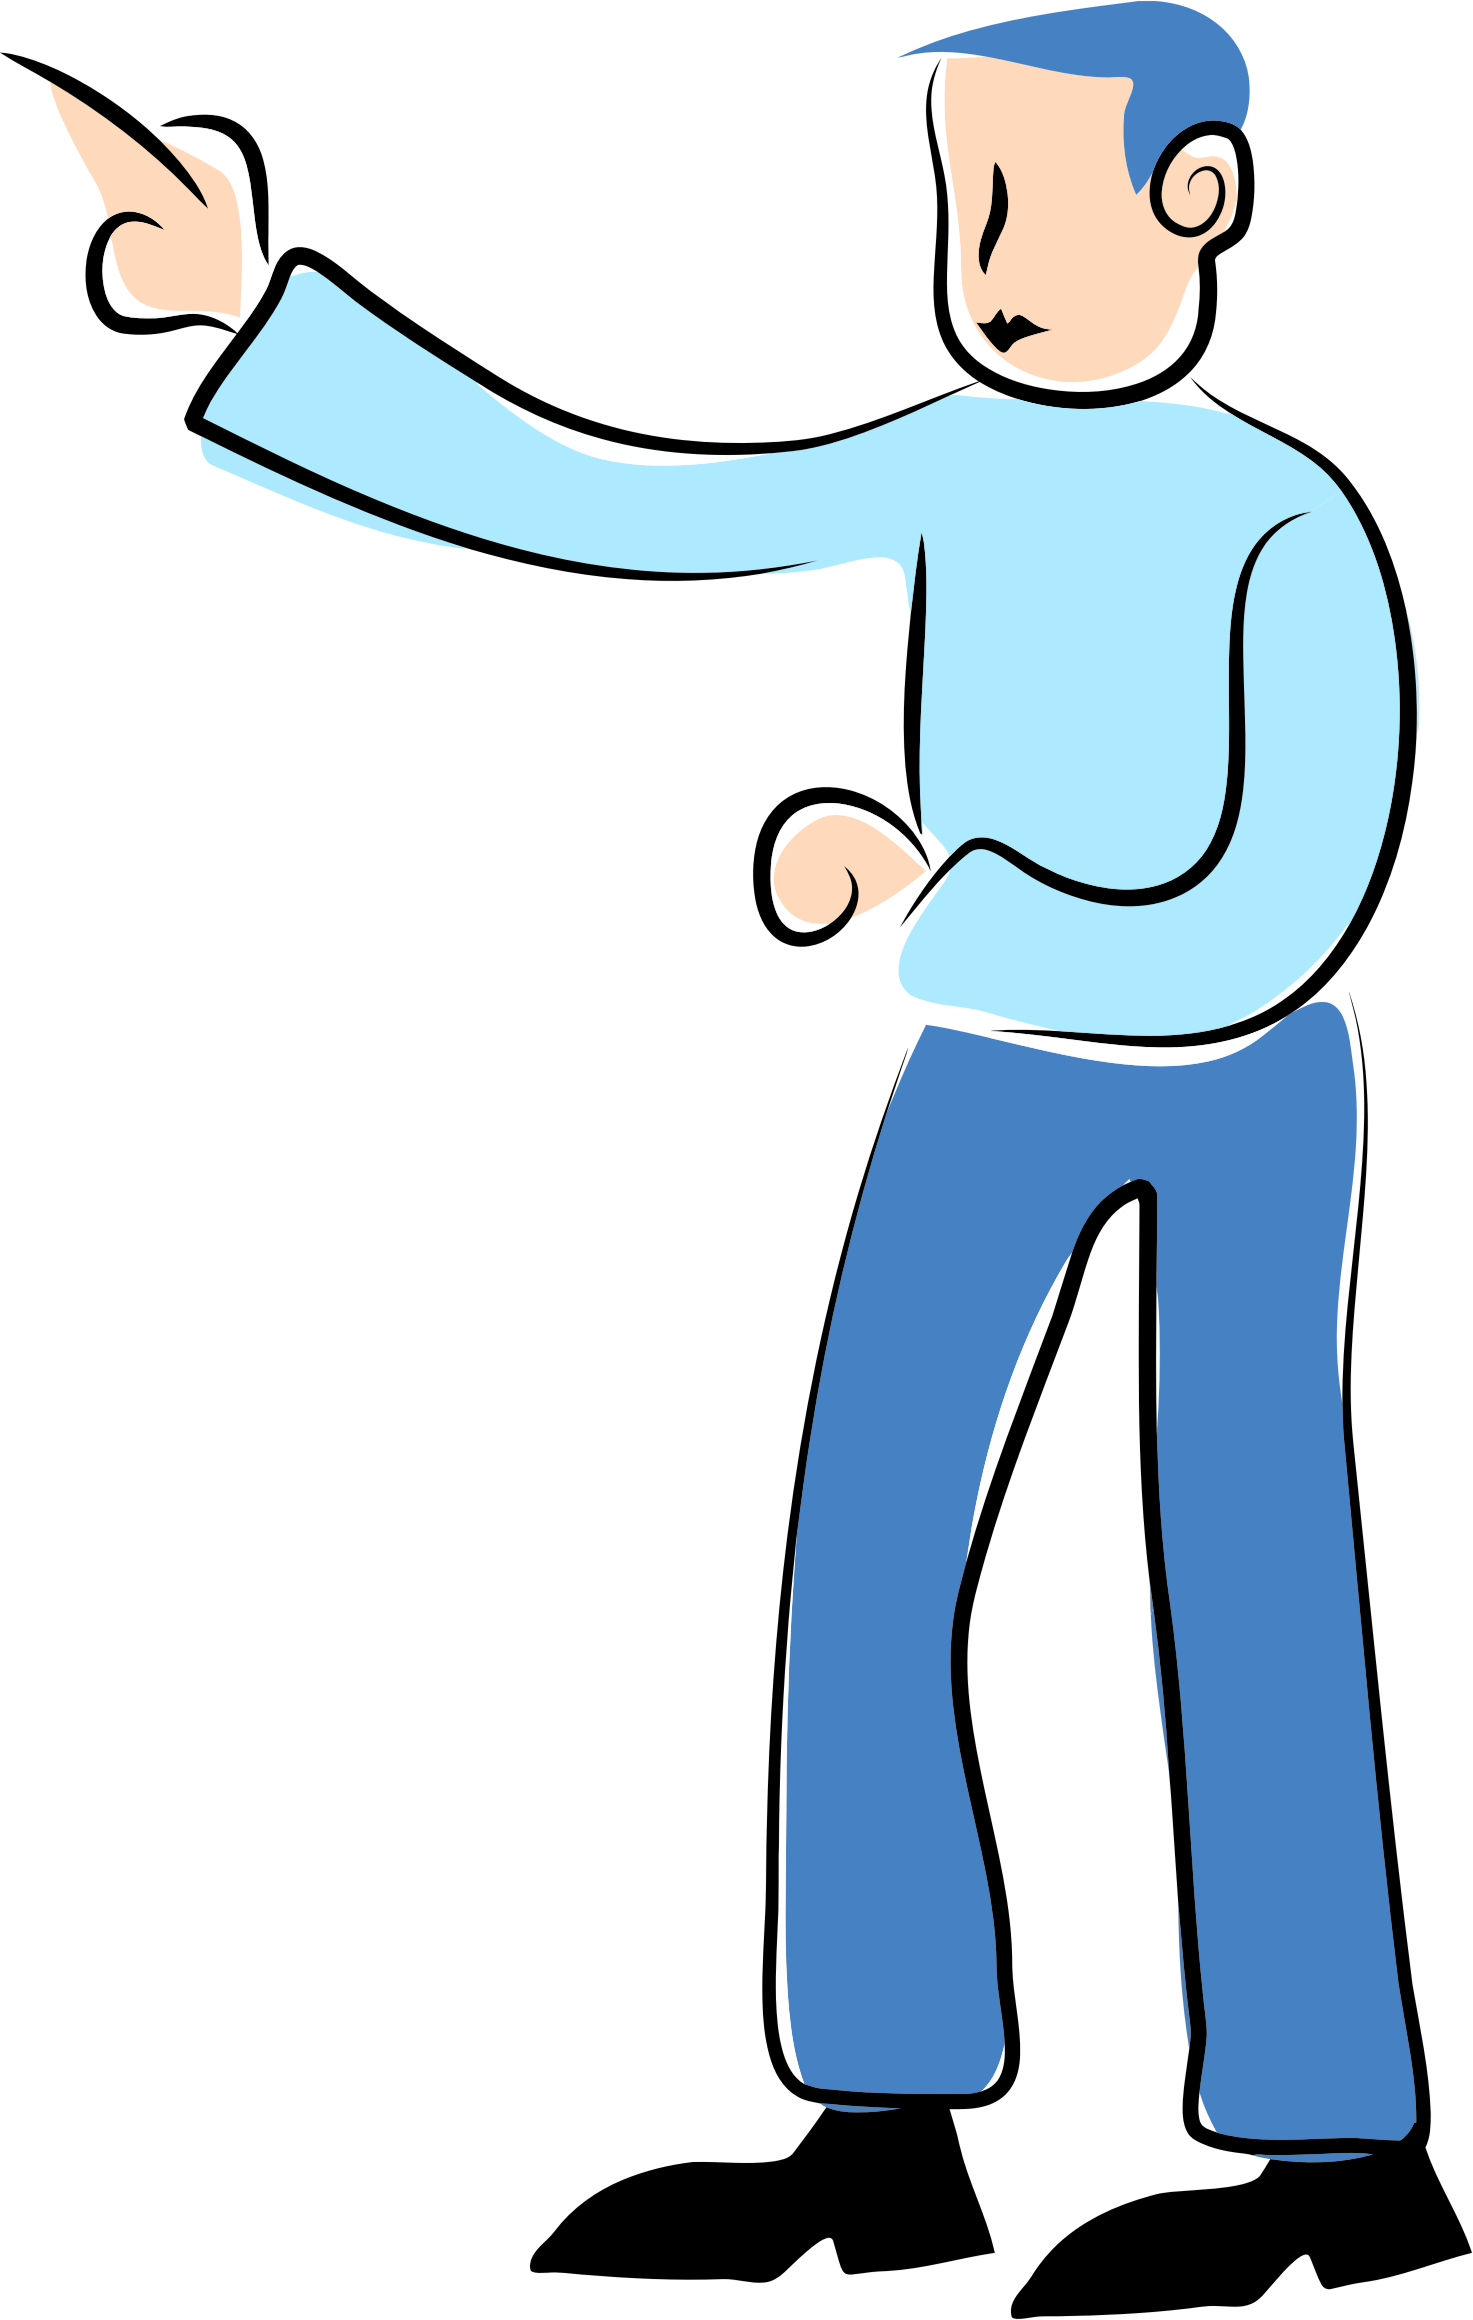 Pointing clipart person. Man big image png